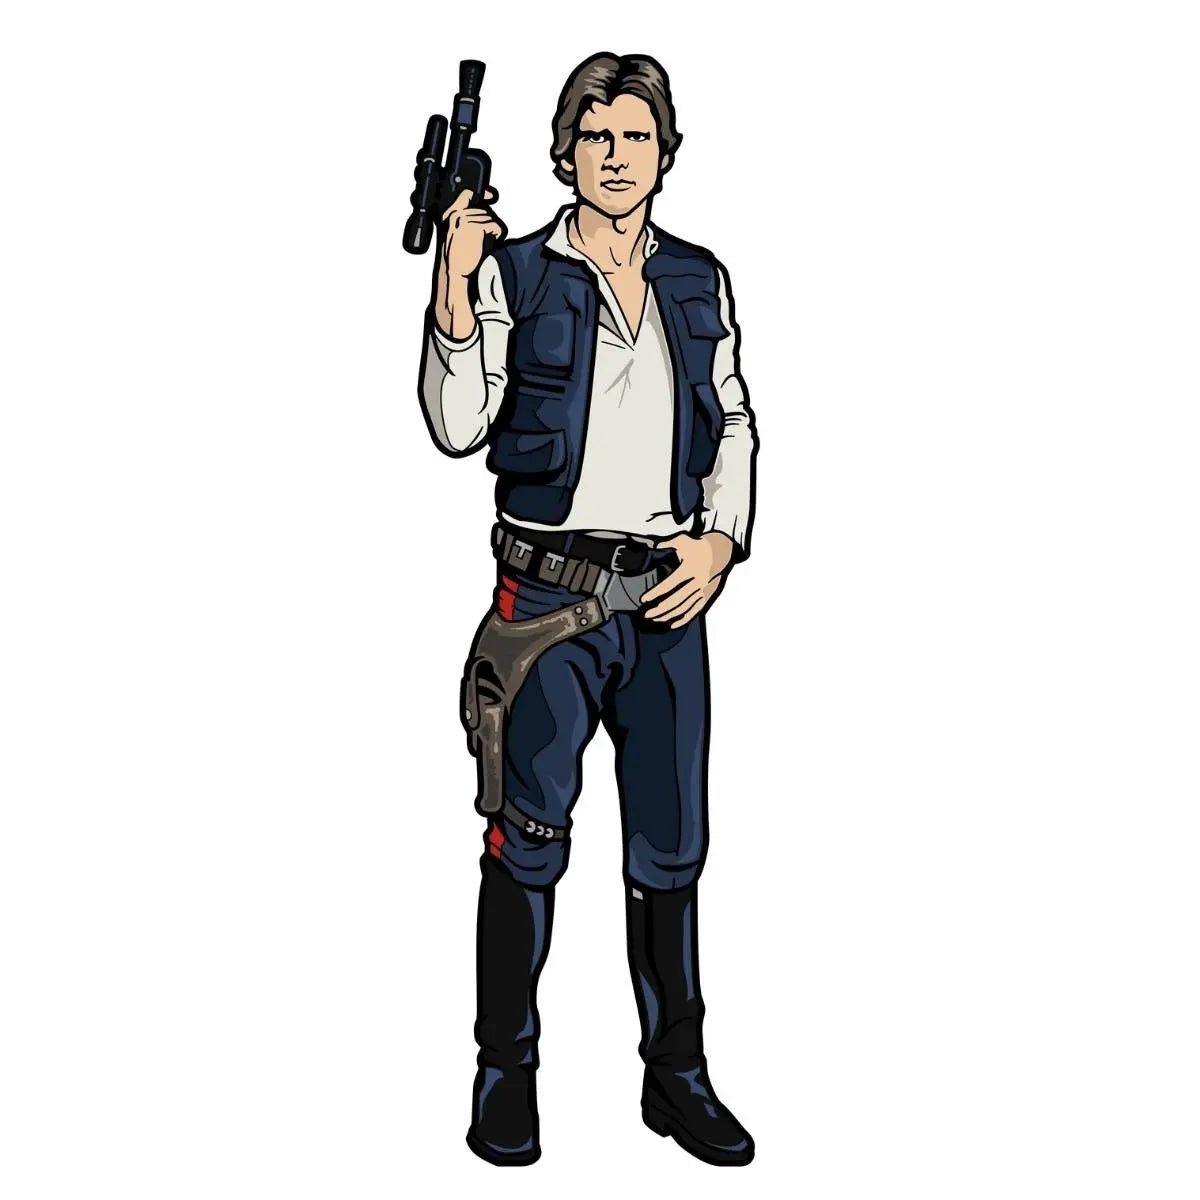 Star Wars: A New Hope Han Solo FiGPiN 3-Inch Enamel Pin #749 - Simon's Collectibles